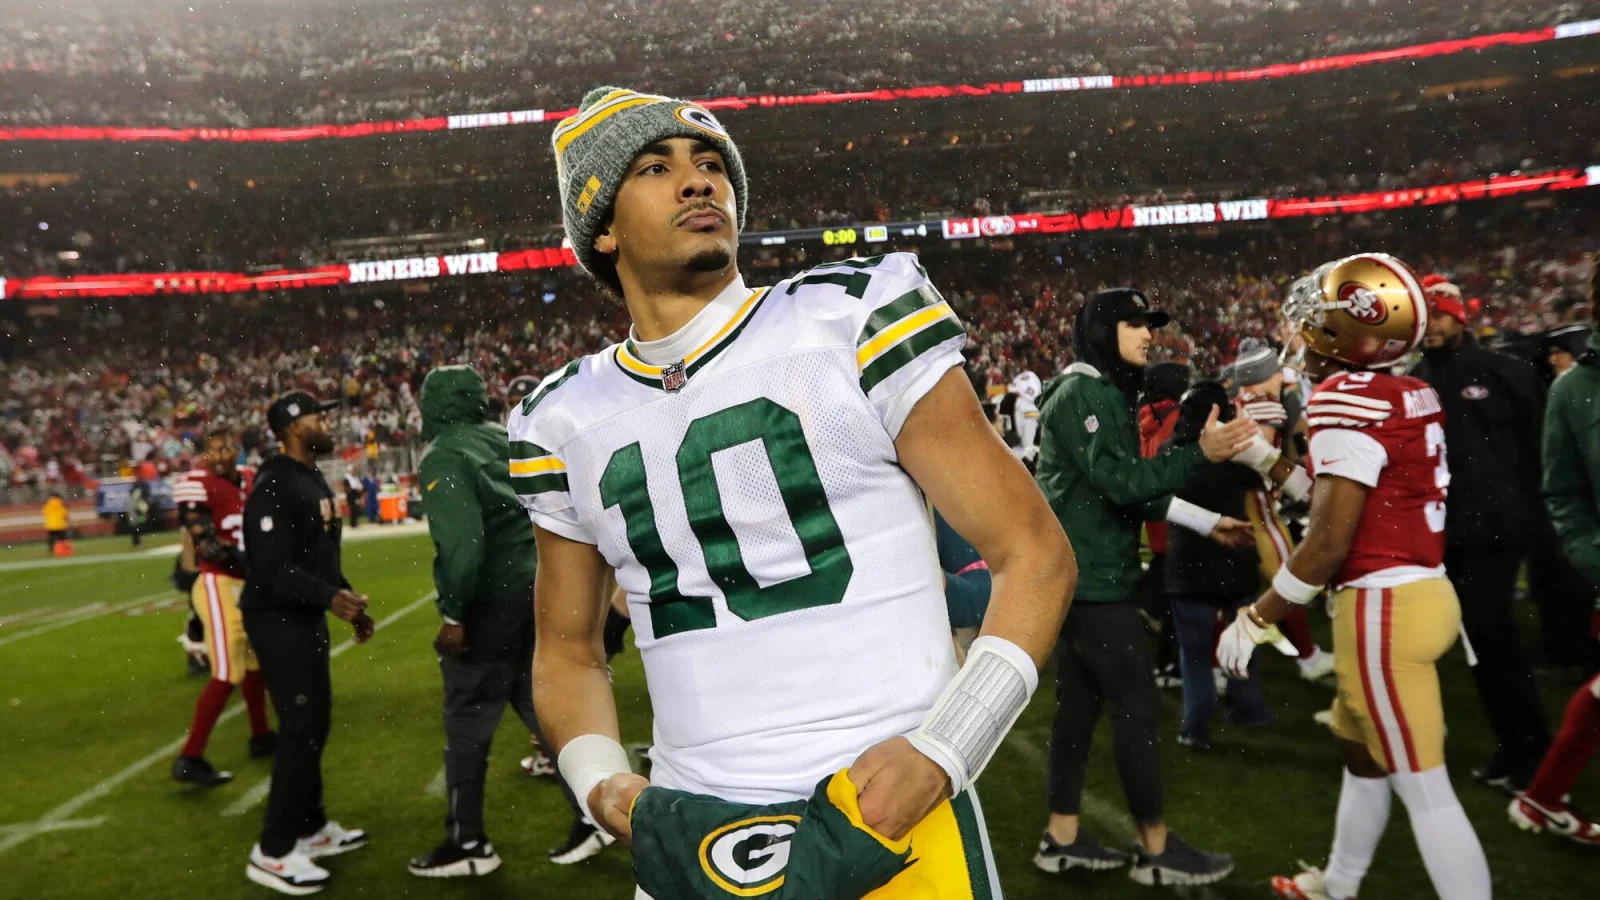  Rising NFL Star How Jordan Love's Comeback Season is Shaping the Future of the Green Bay Packers---